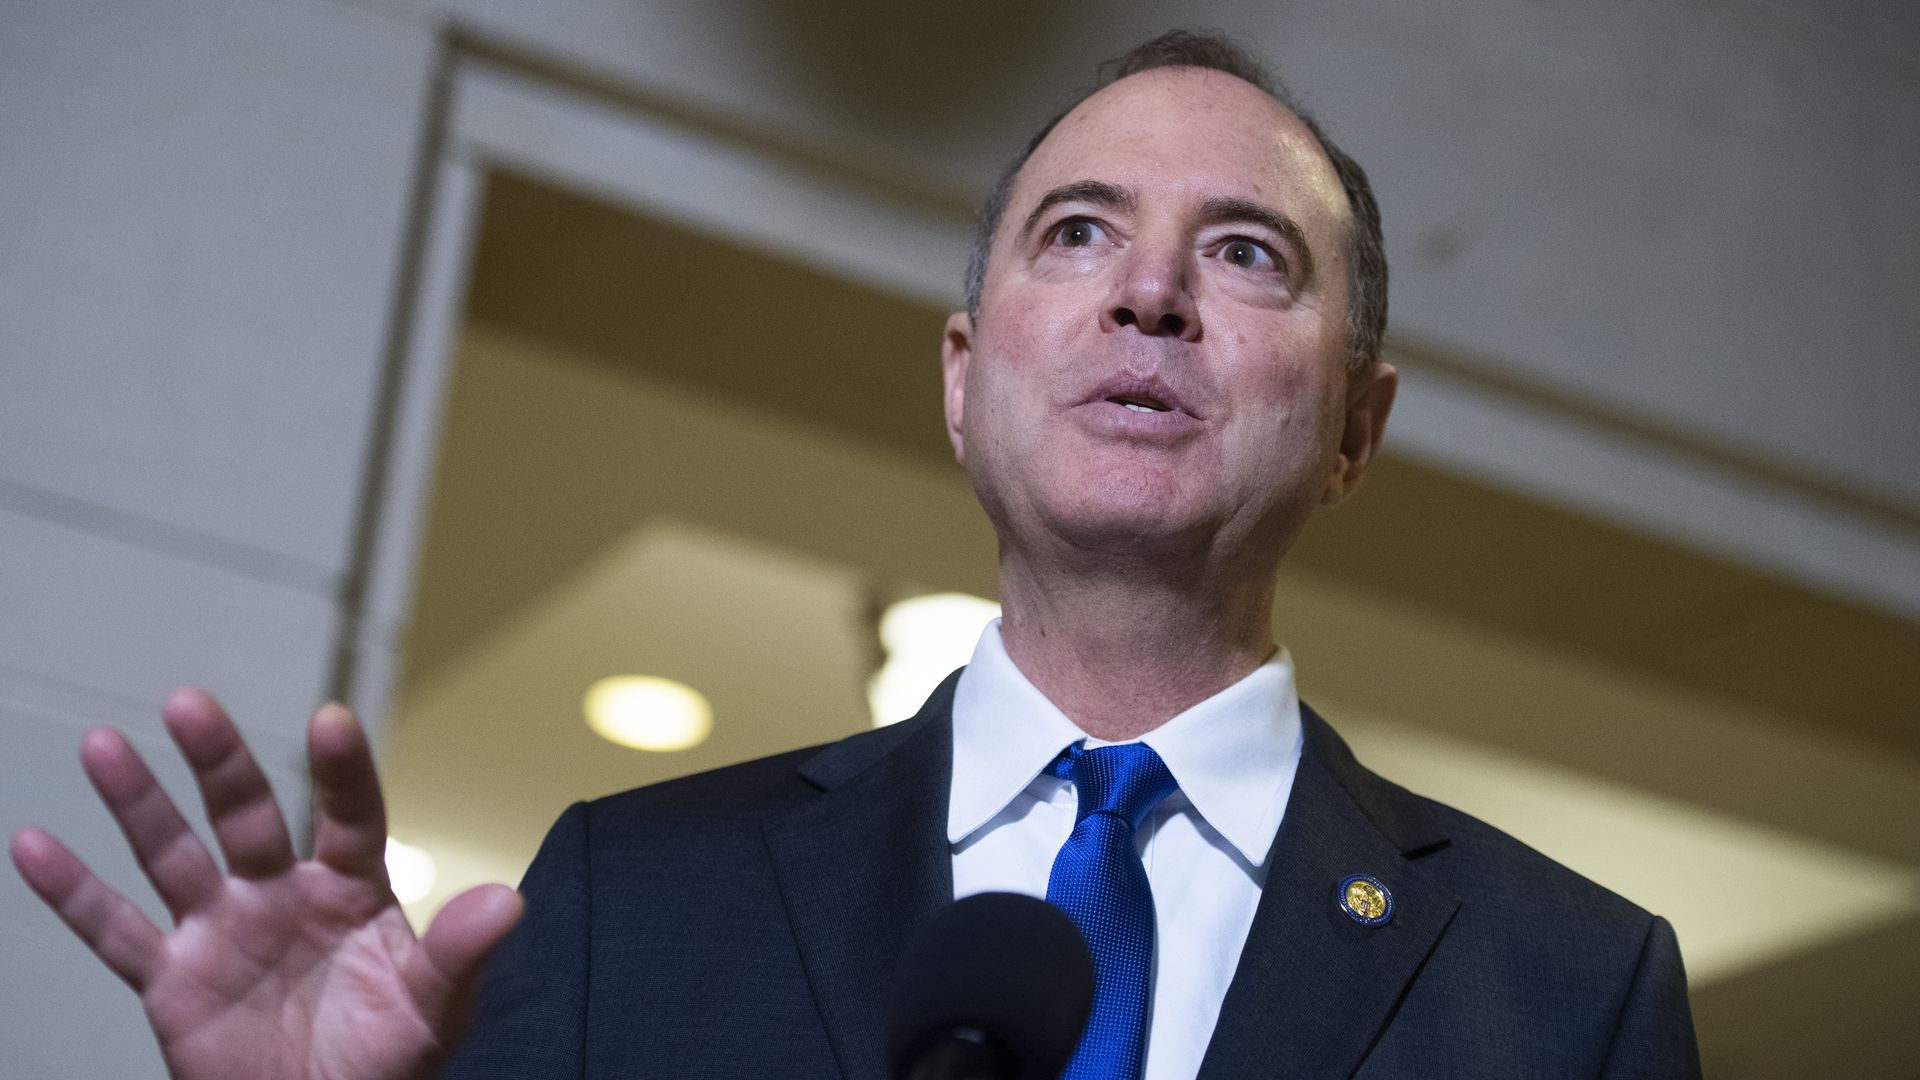 House Intelligence Committee Chairman Adam Schiff, D-Calif., speaks to the media on Monday, November 4